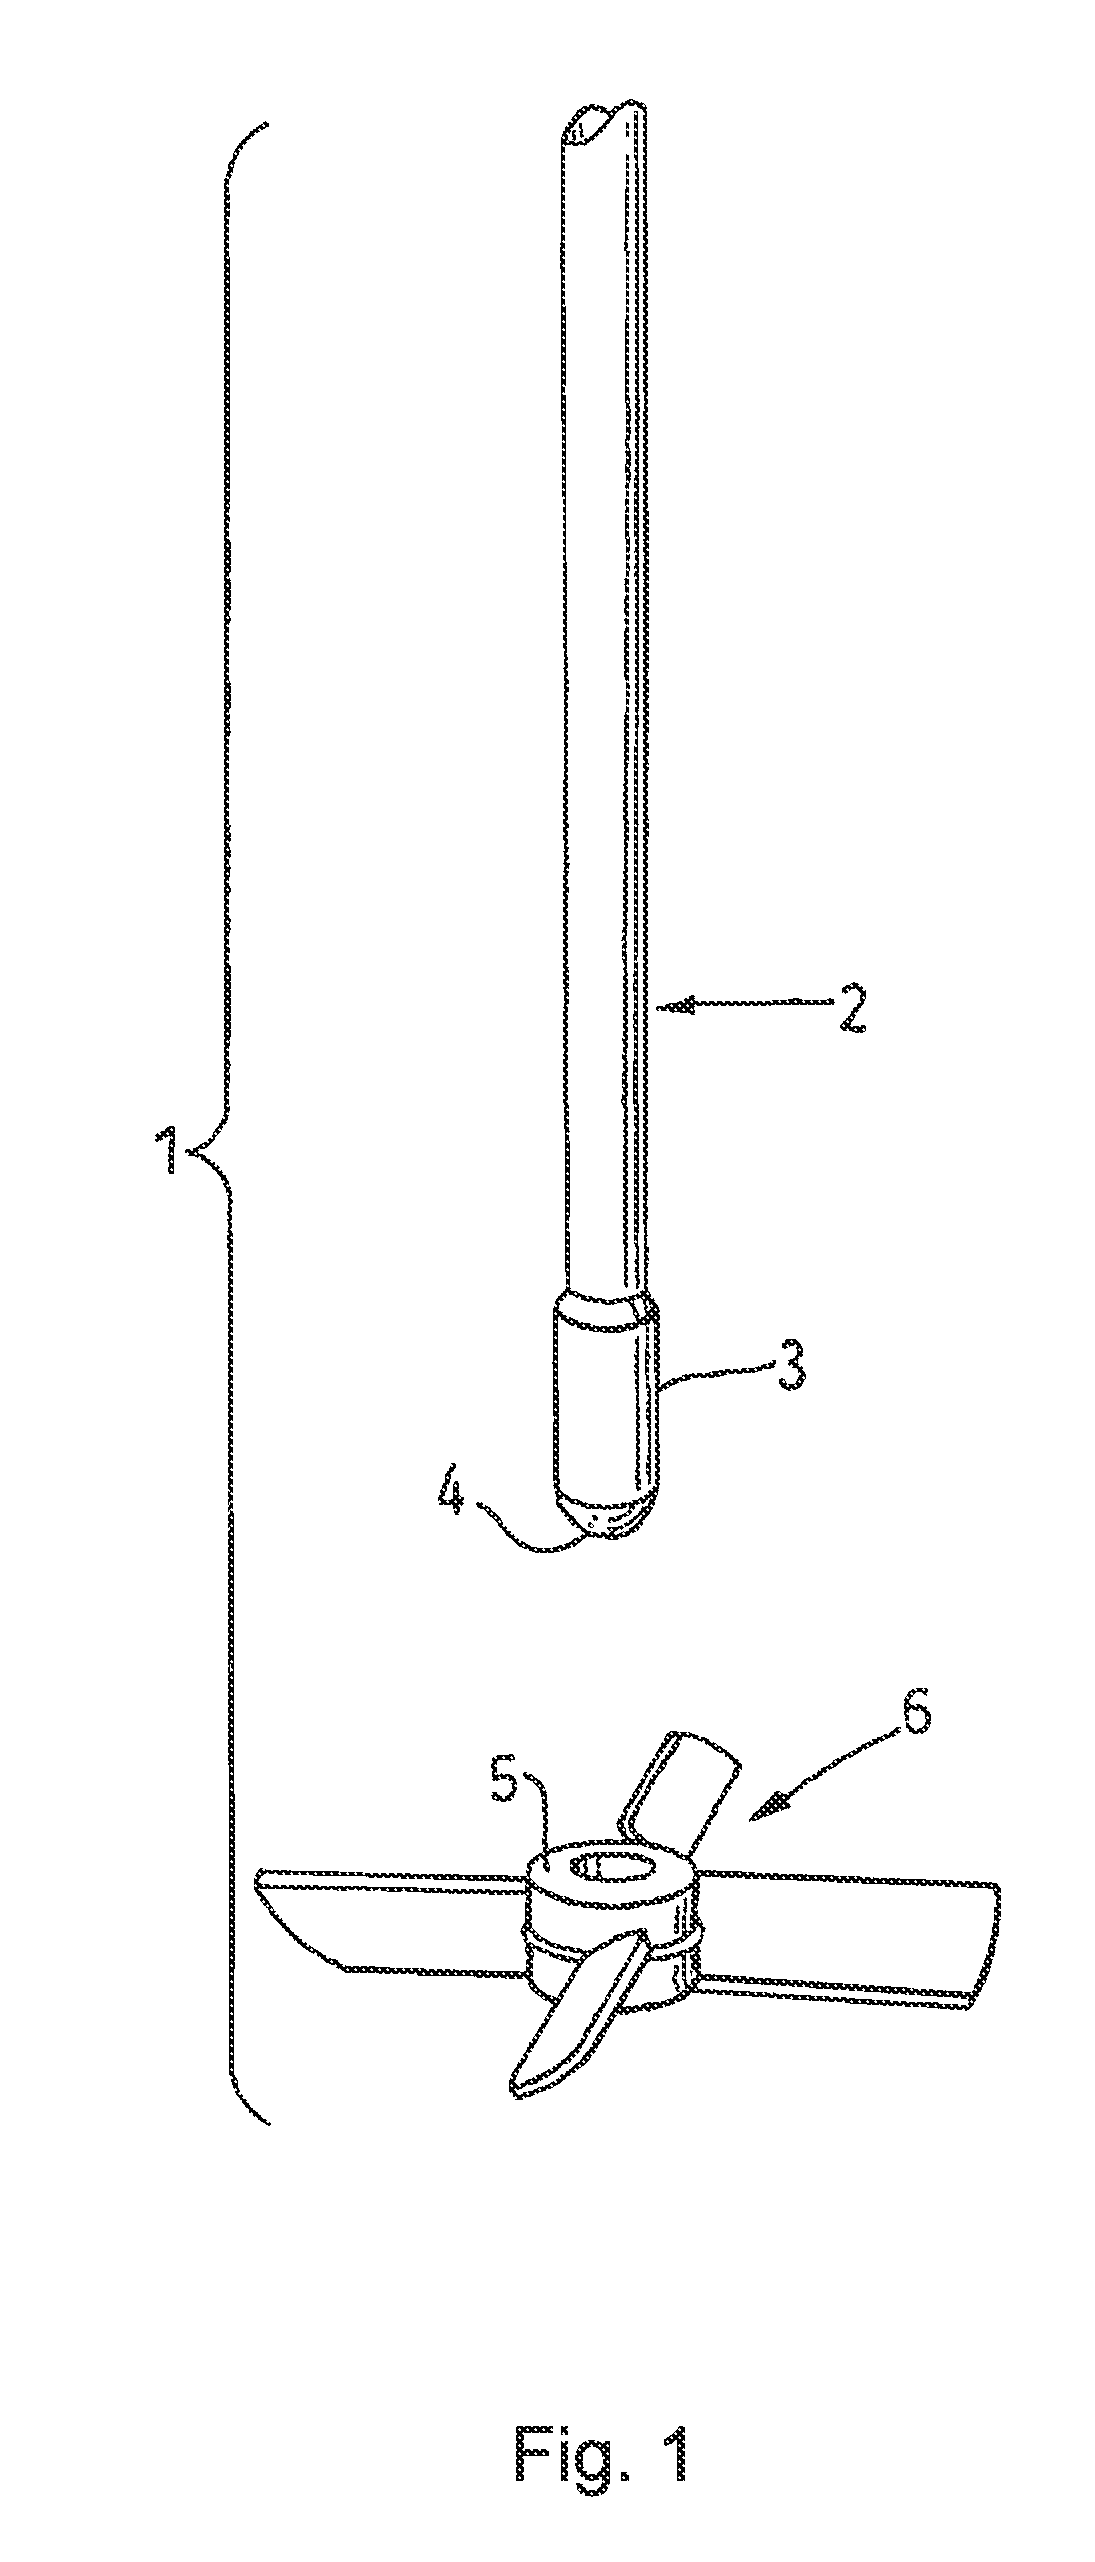 Electrical connection between conductive elements